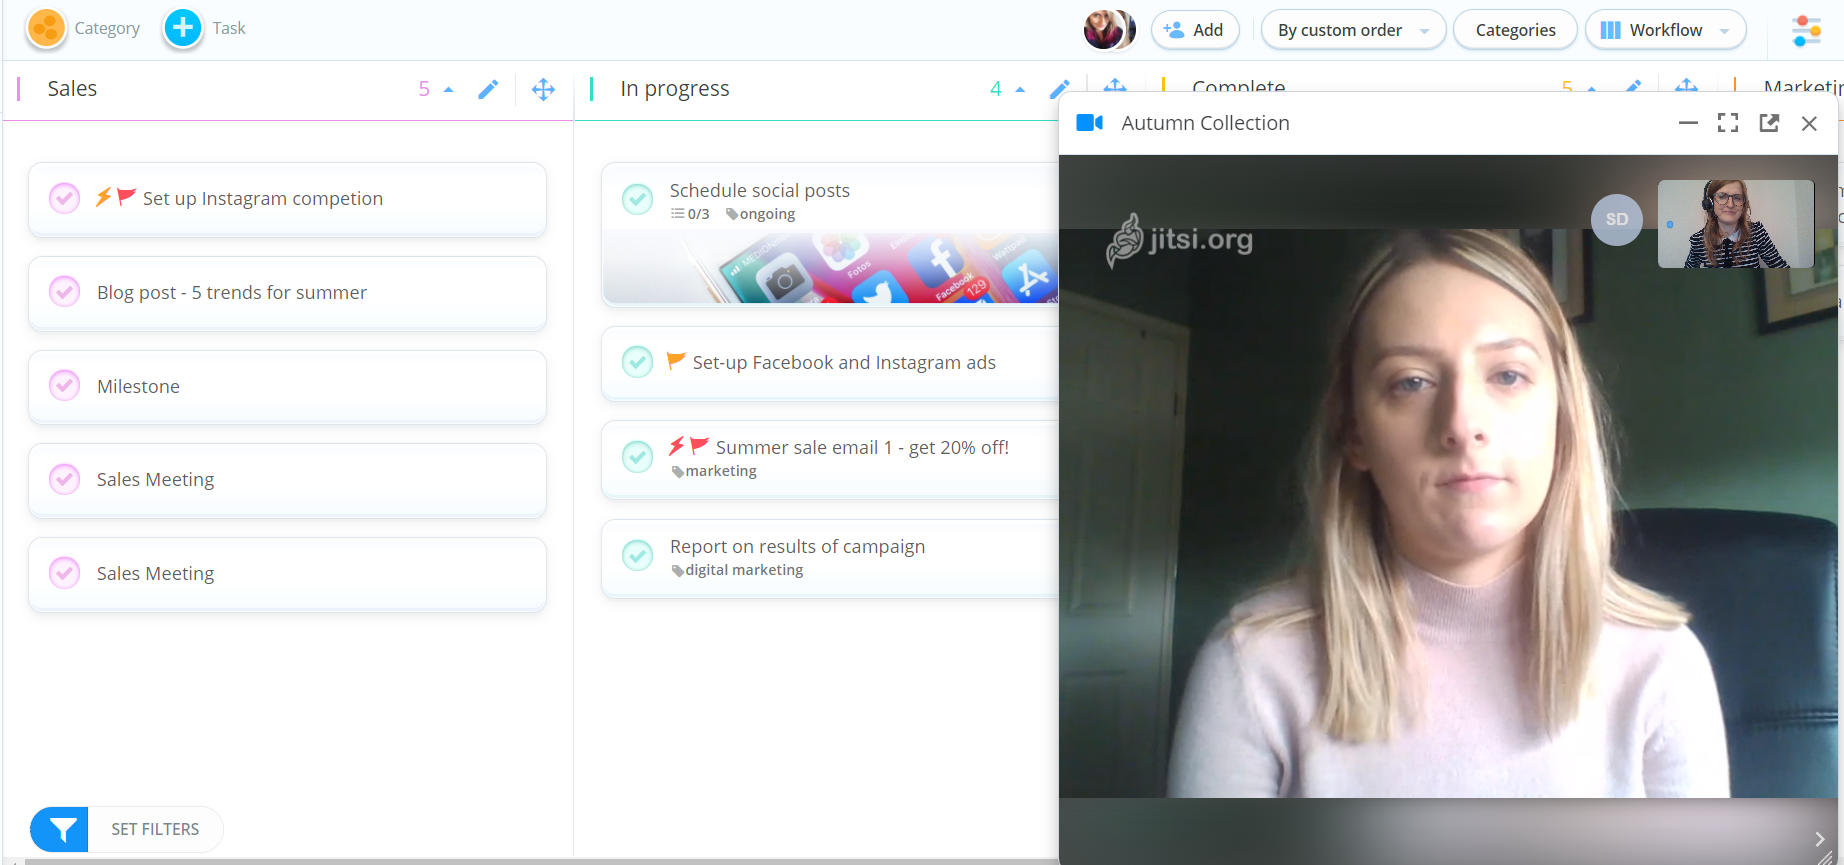 The Video chat will now open